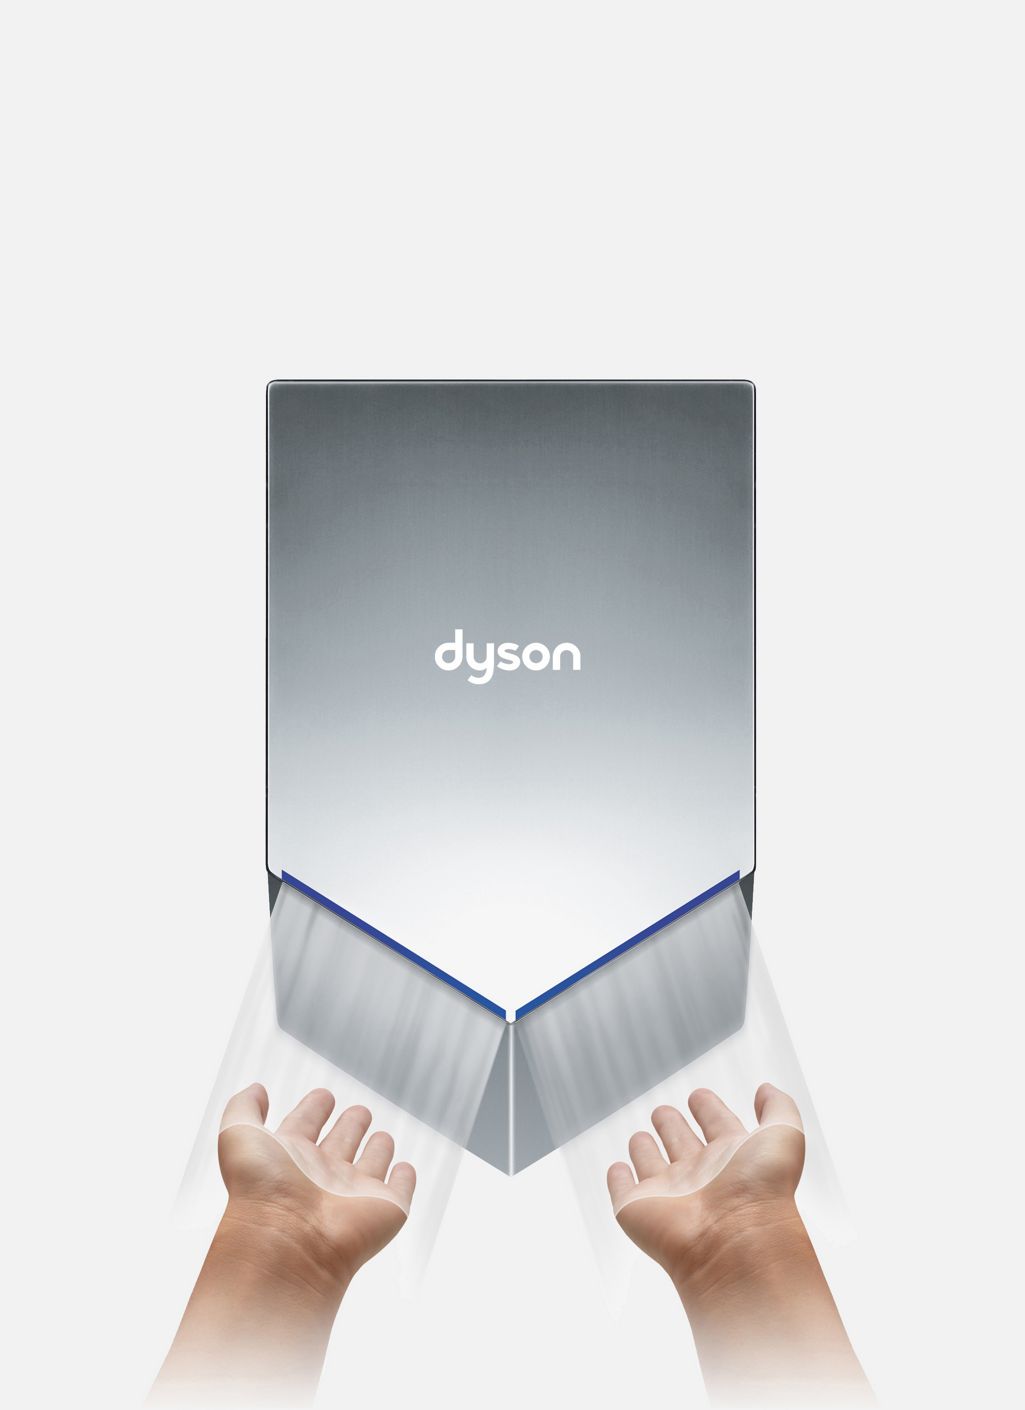 Dyson Airblade Hand Dryer: The Ultimate Machine